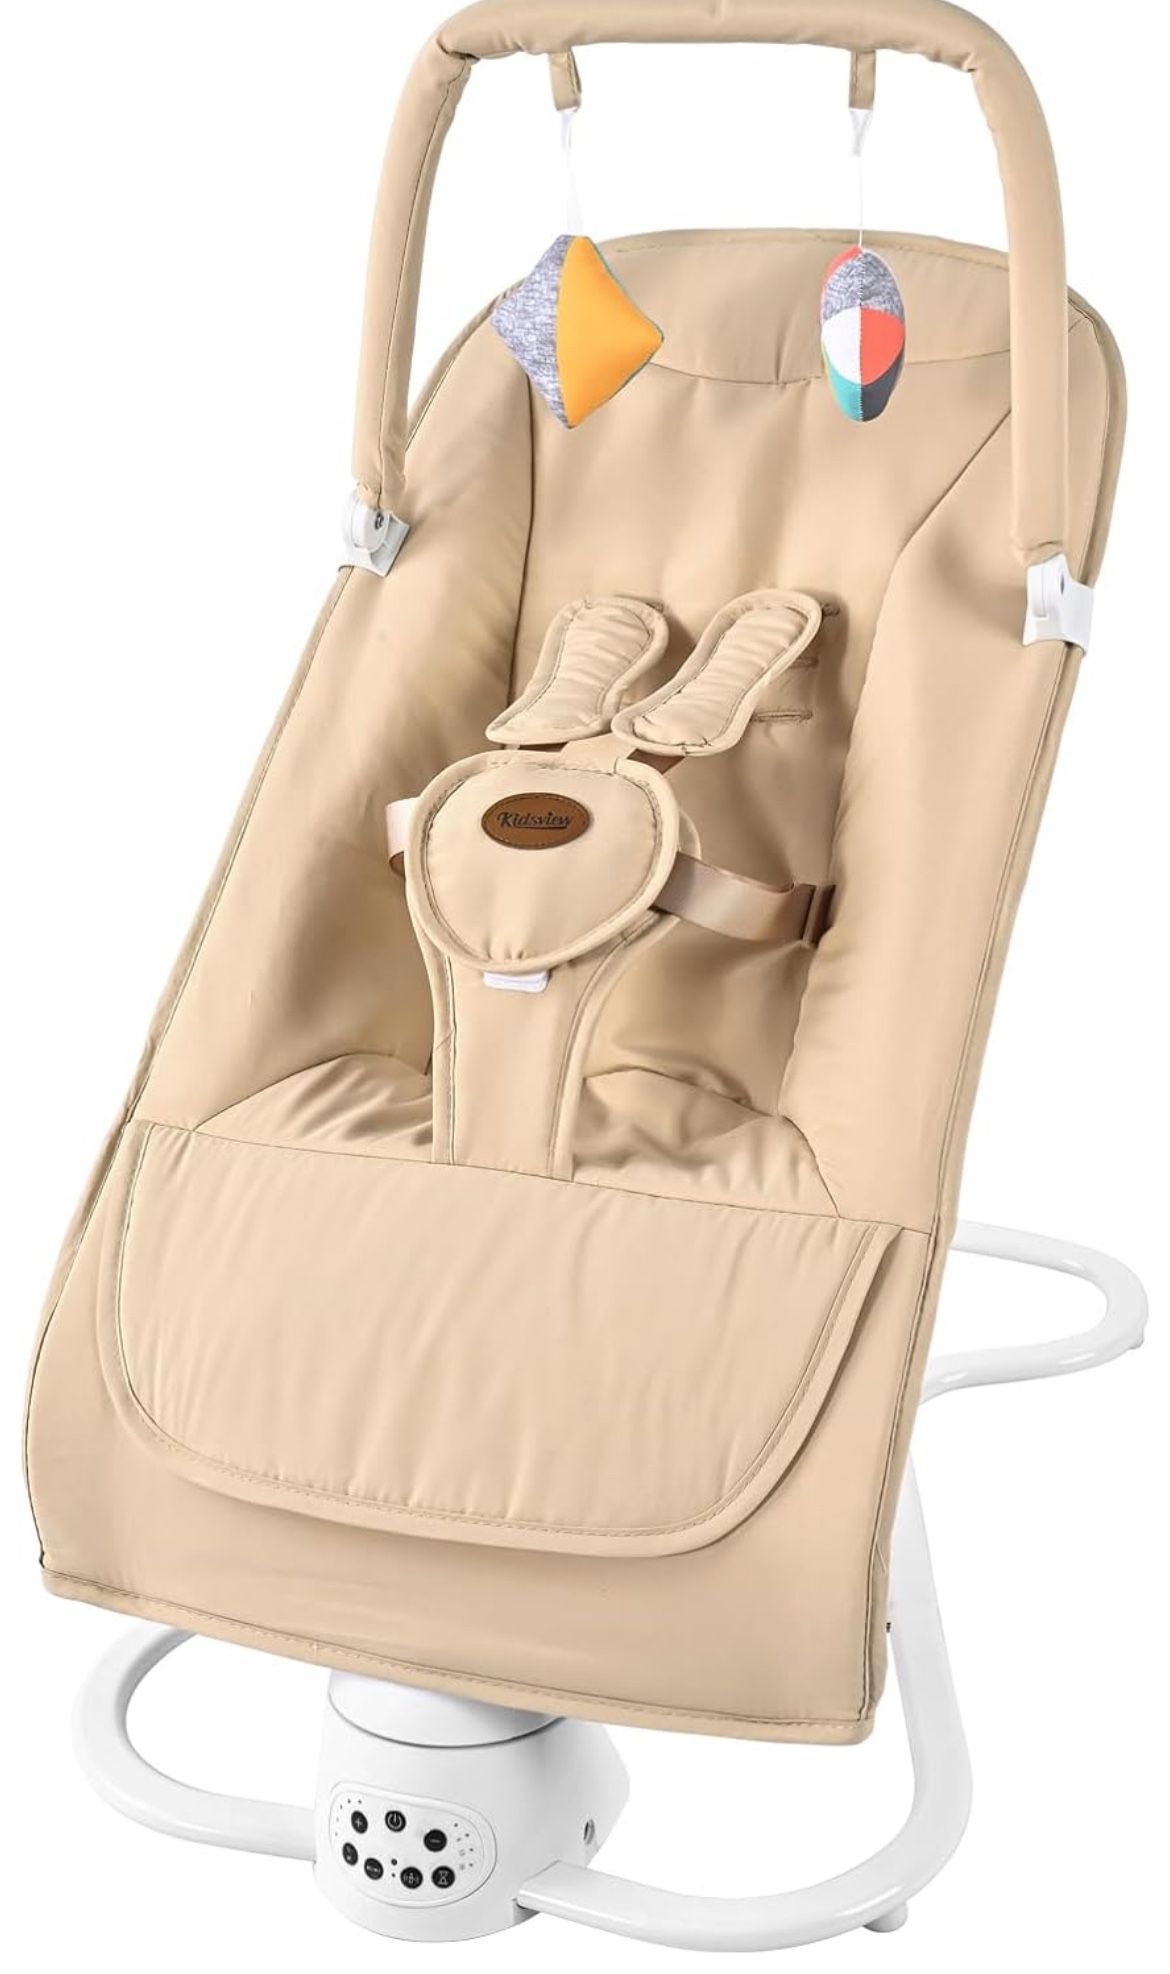 Baby Swing for Infants, Electric 2-in-1 Portable Baby Bouncer Soft Seat